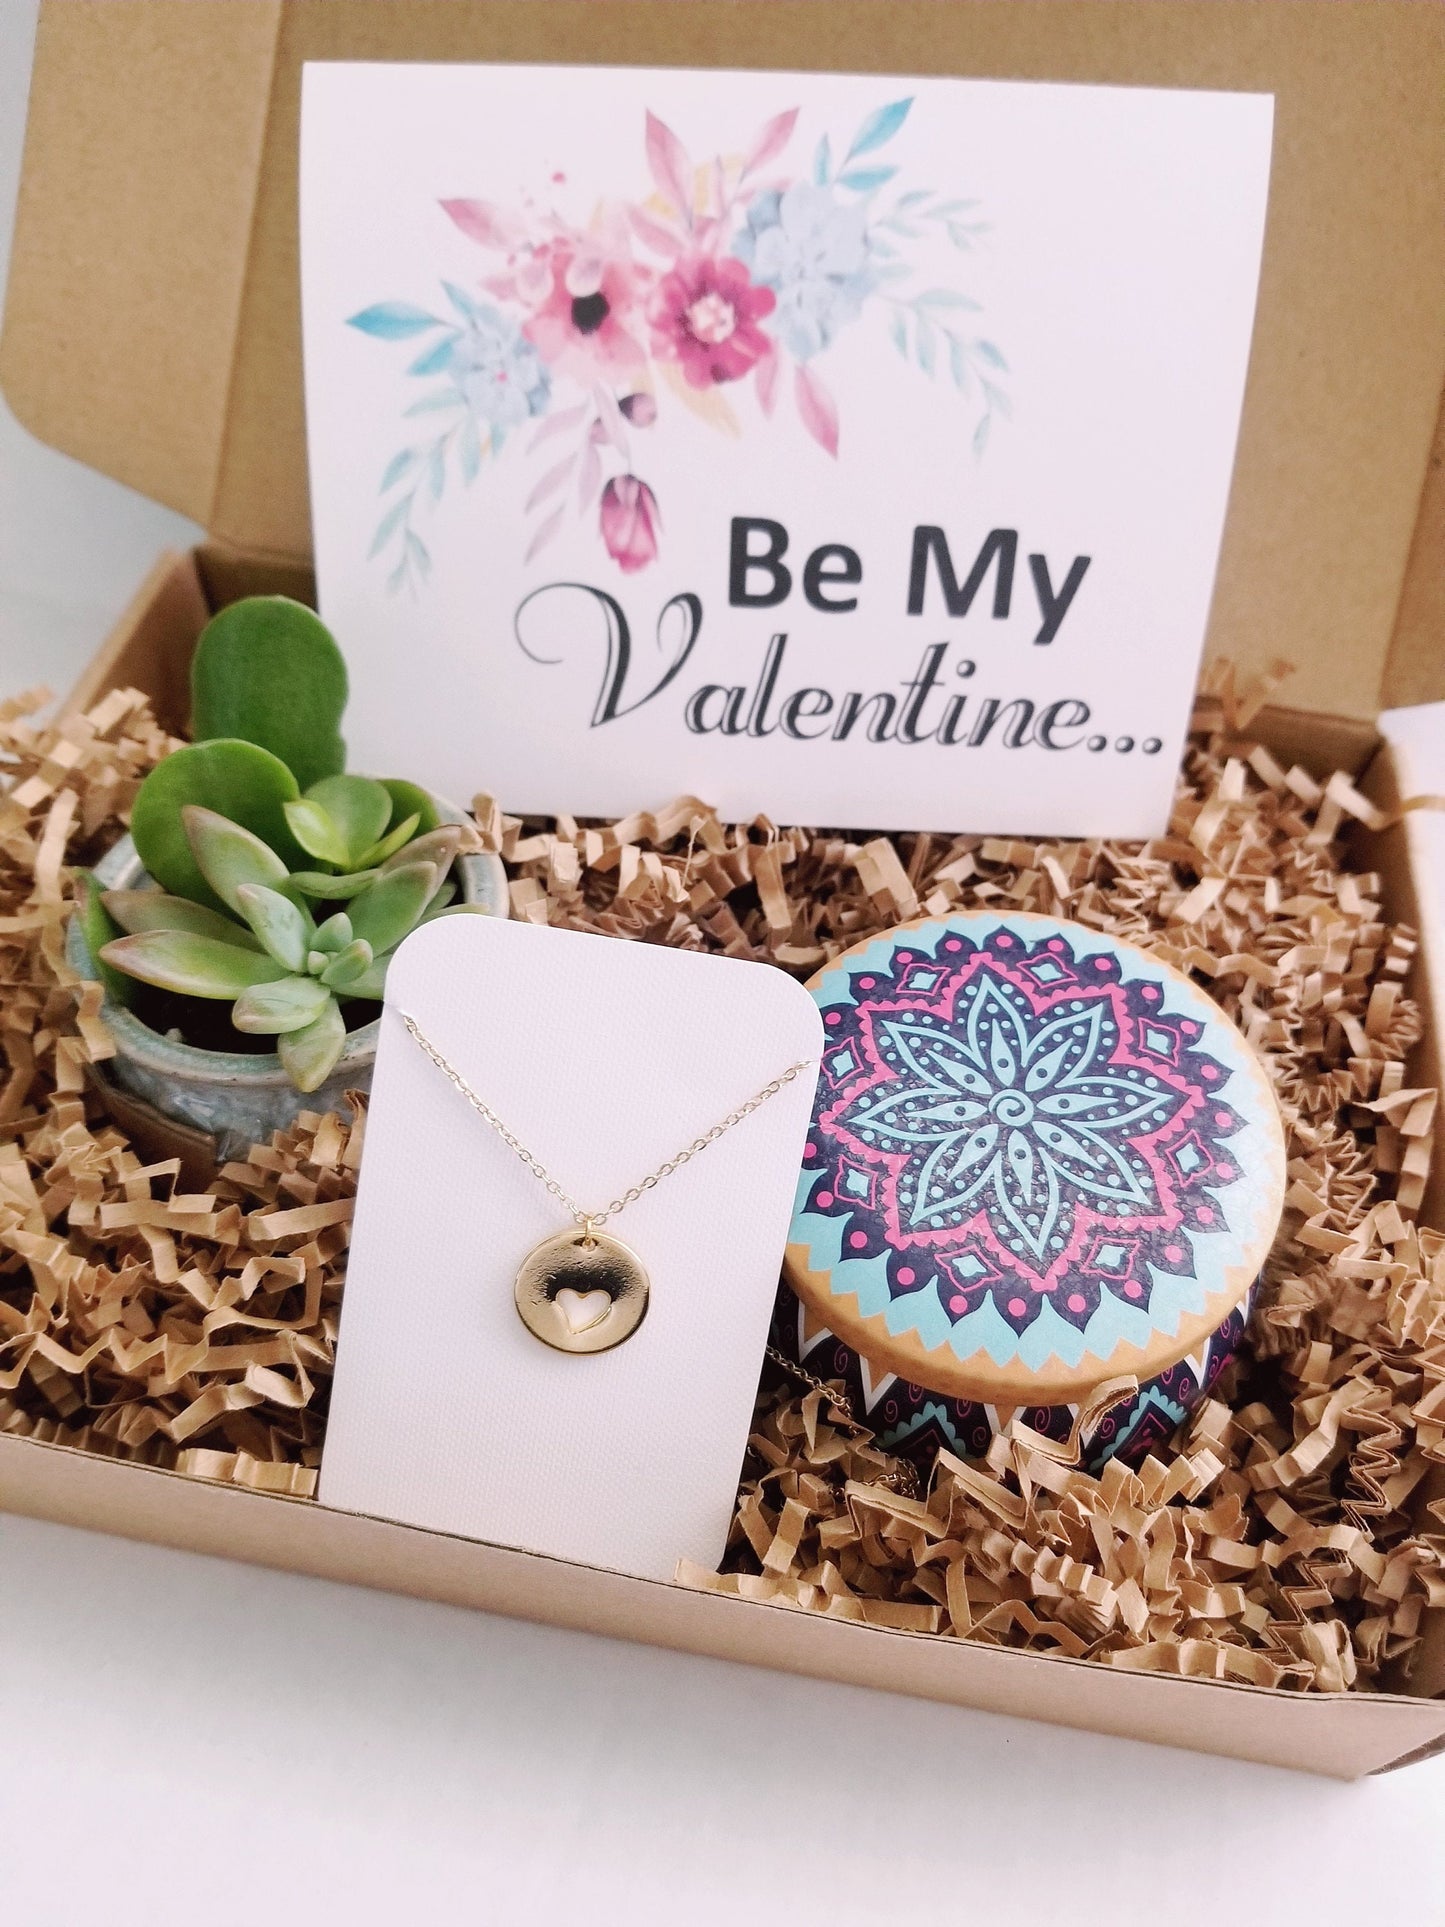 Be my Valentine gift set, Live succulent, Valentine's day gift, heart necklace